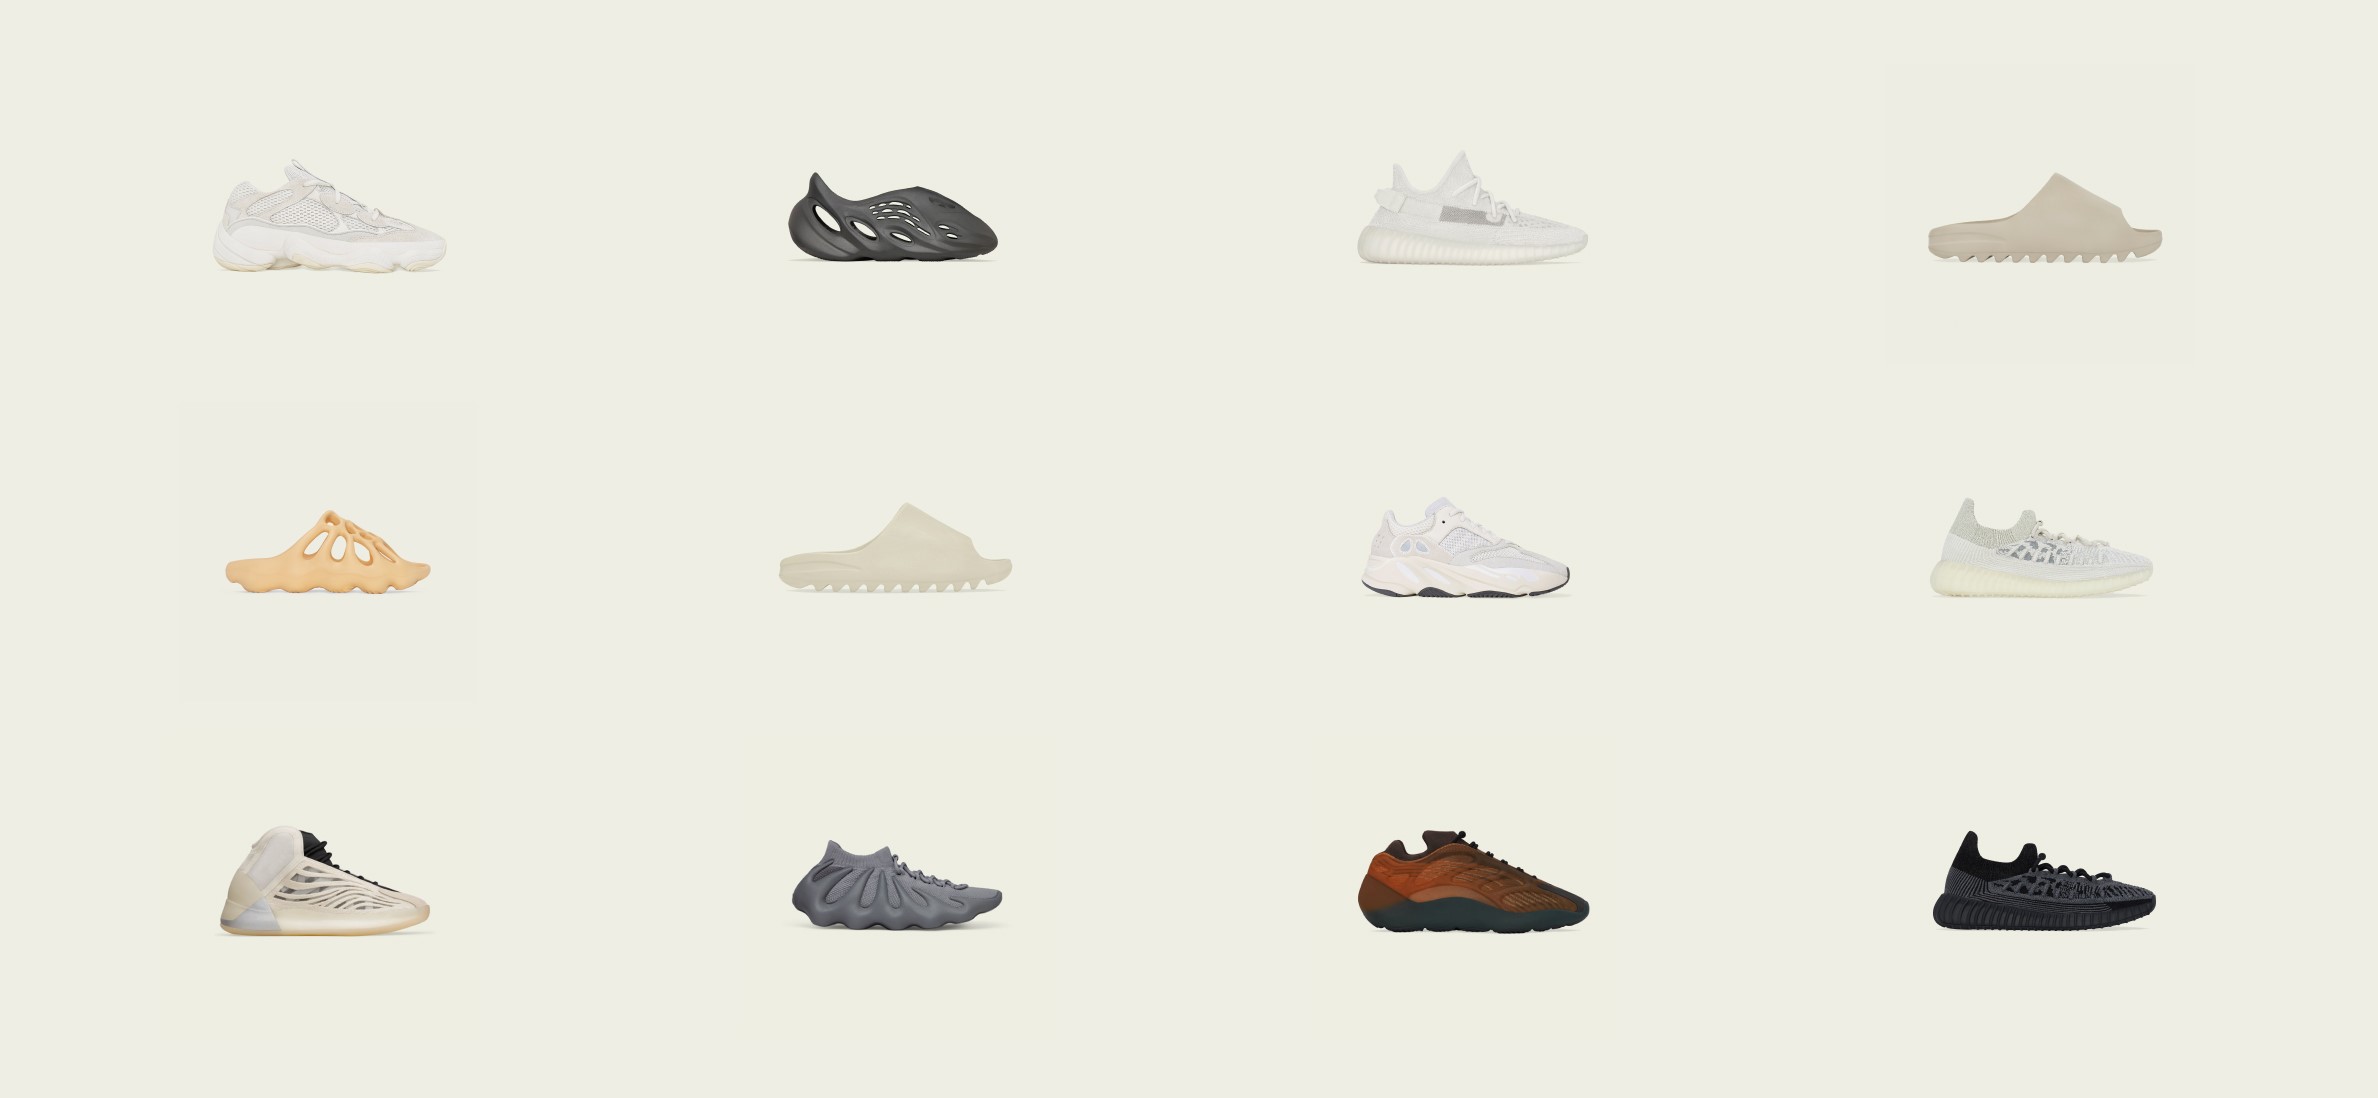 Site press resources for all brands sports and innovations yeezy